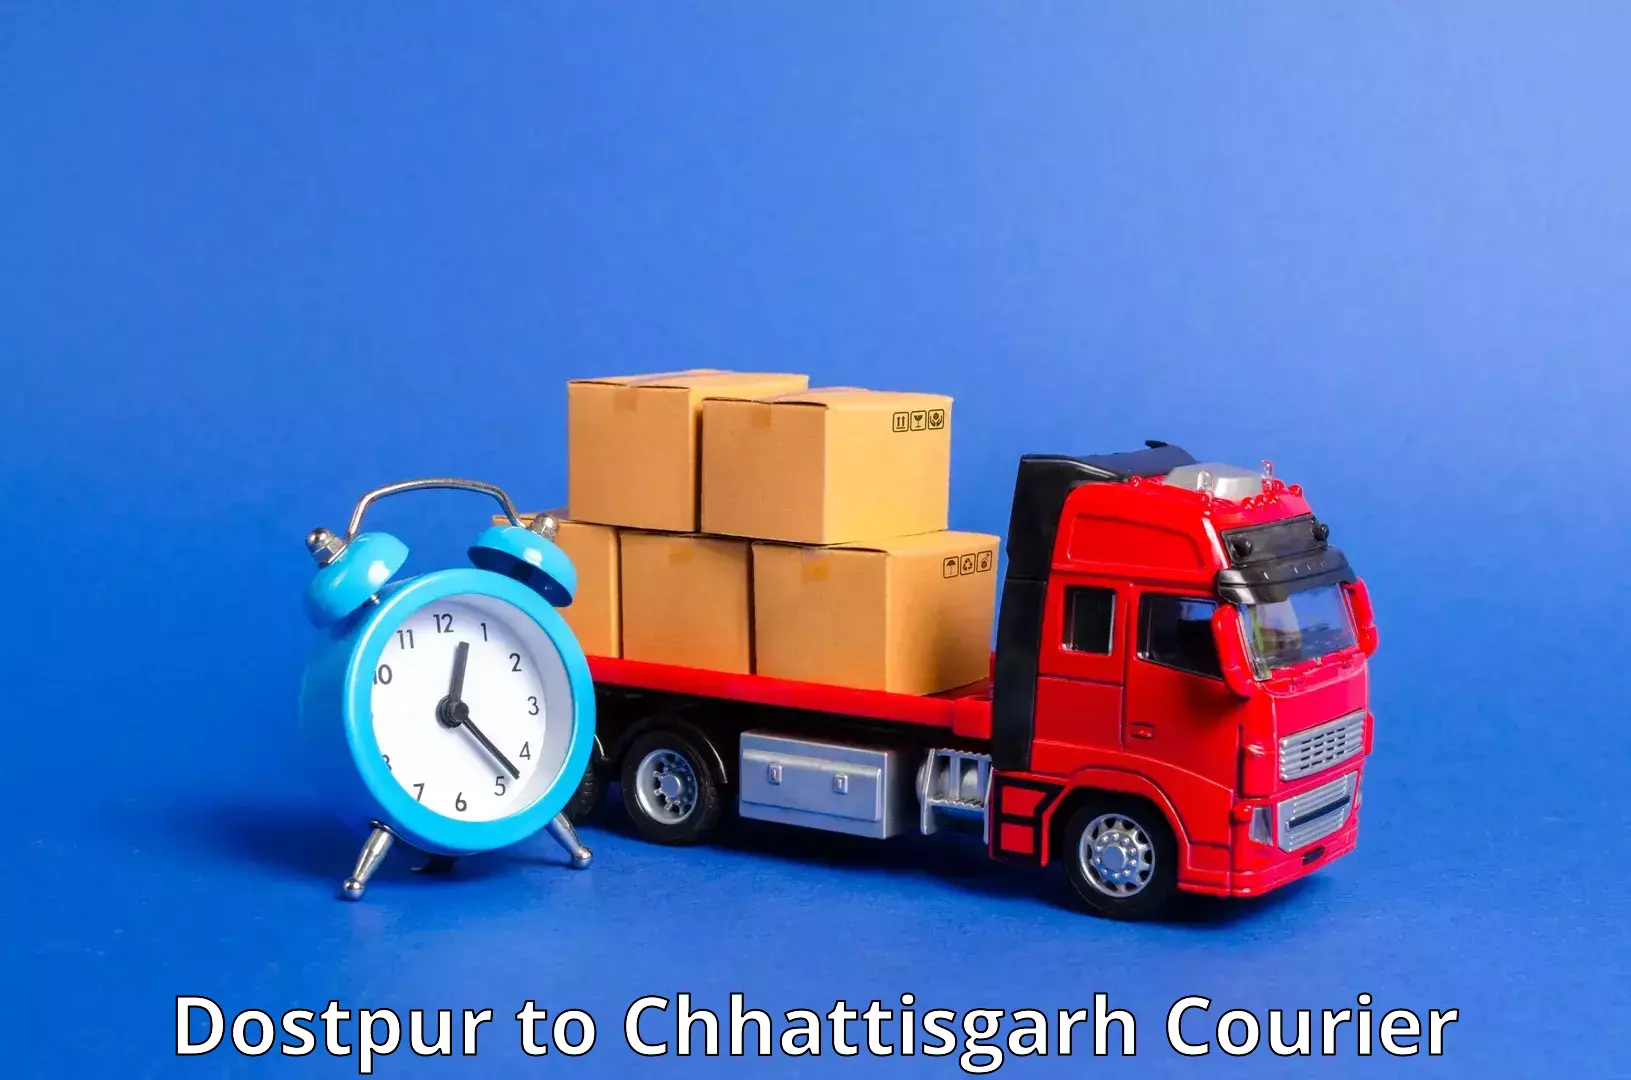 On-call courier service Dostpur to Basna